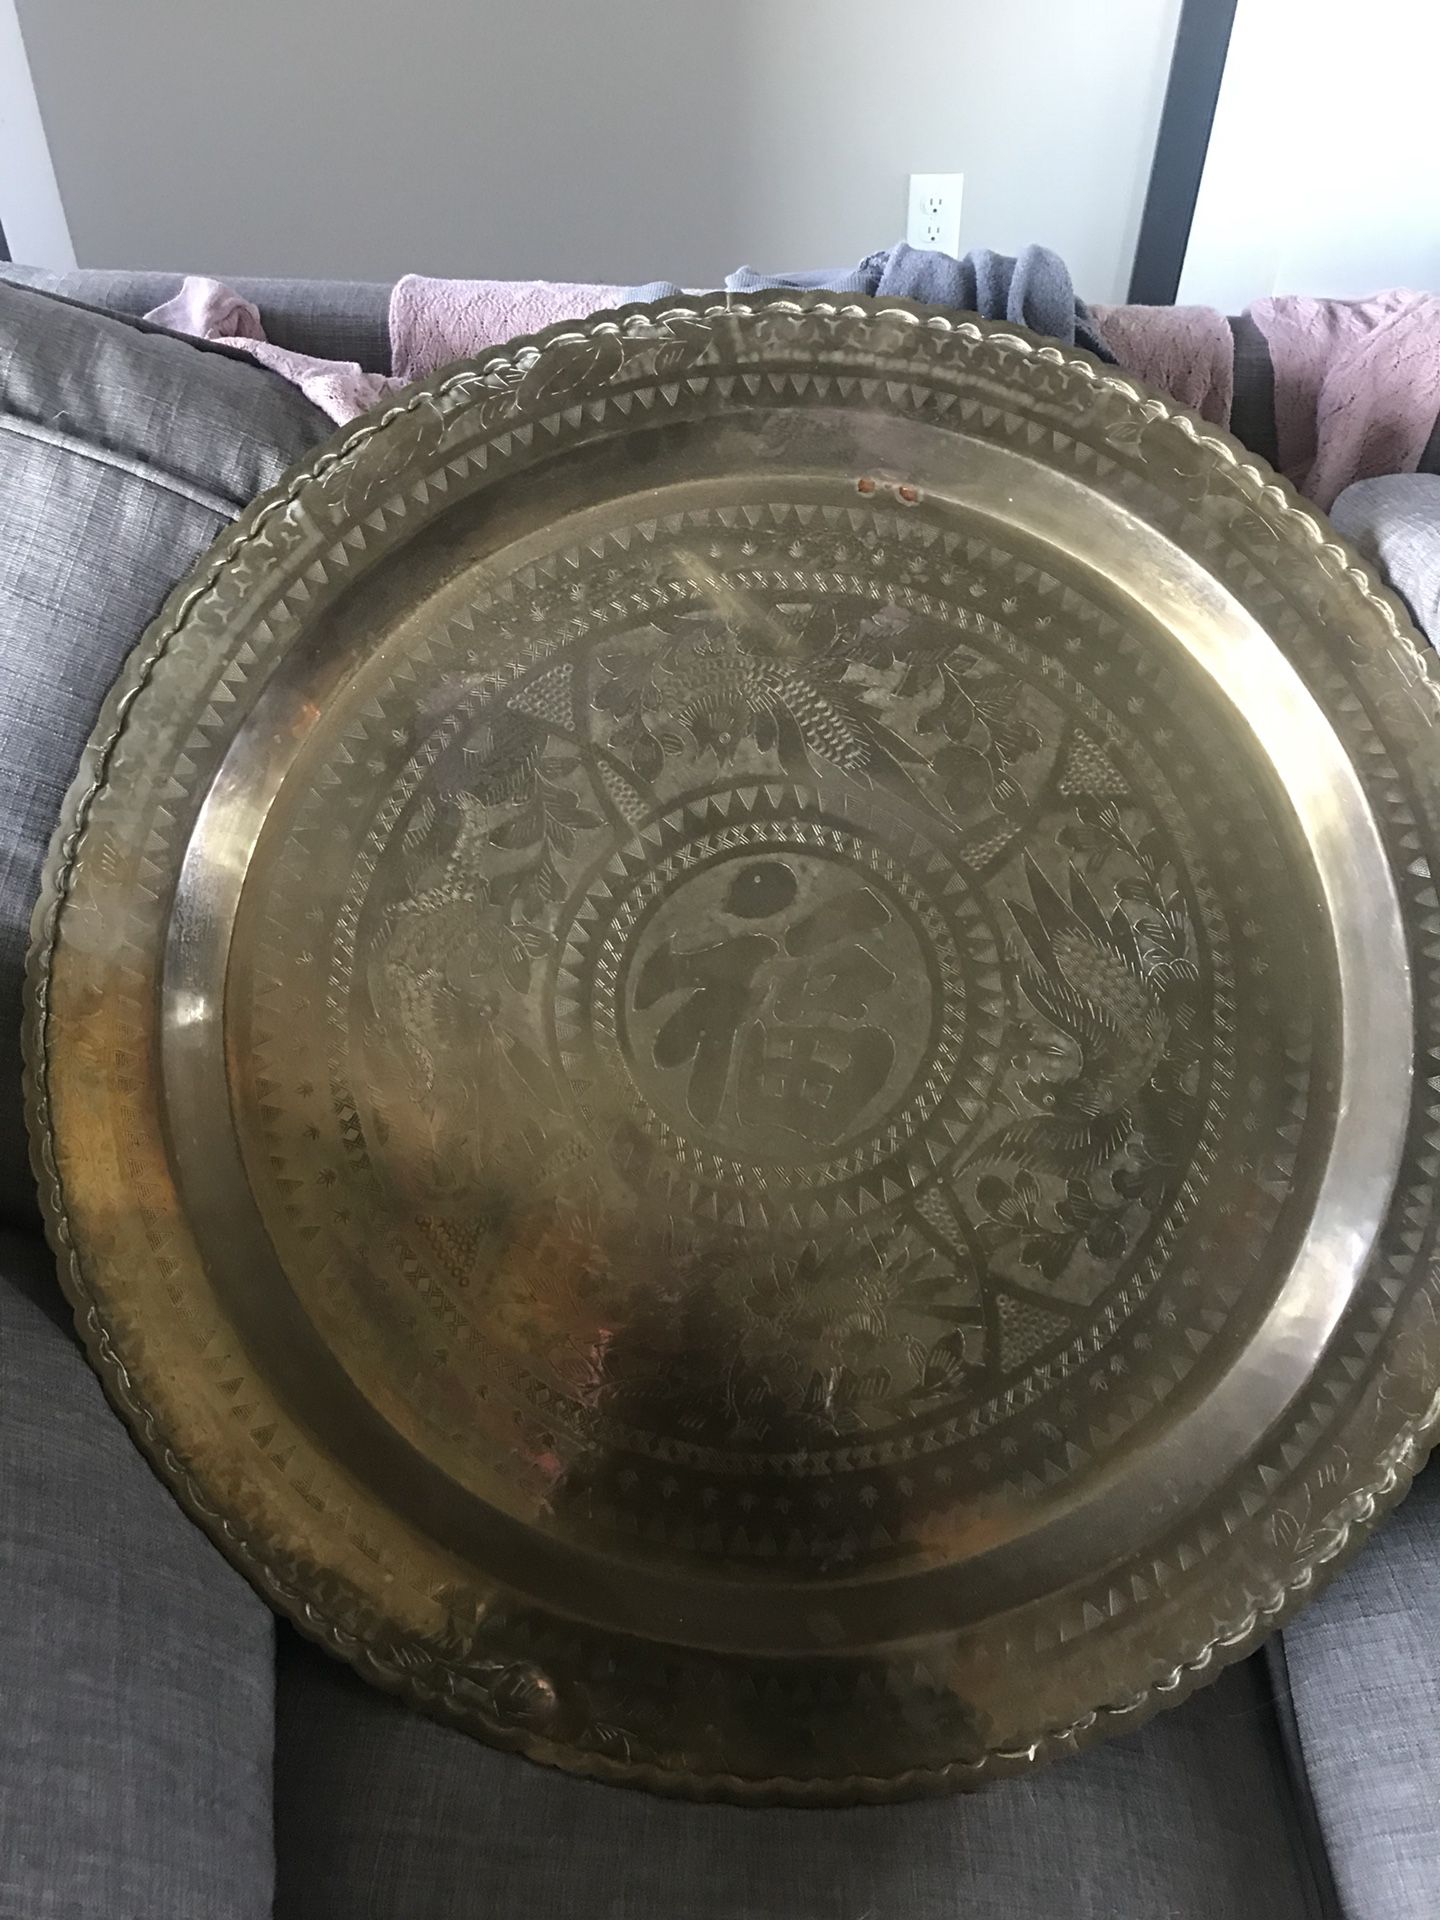 Vintage Asian themed brass wall hanging 24” diameter